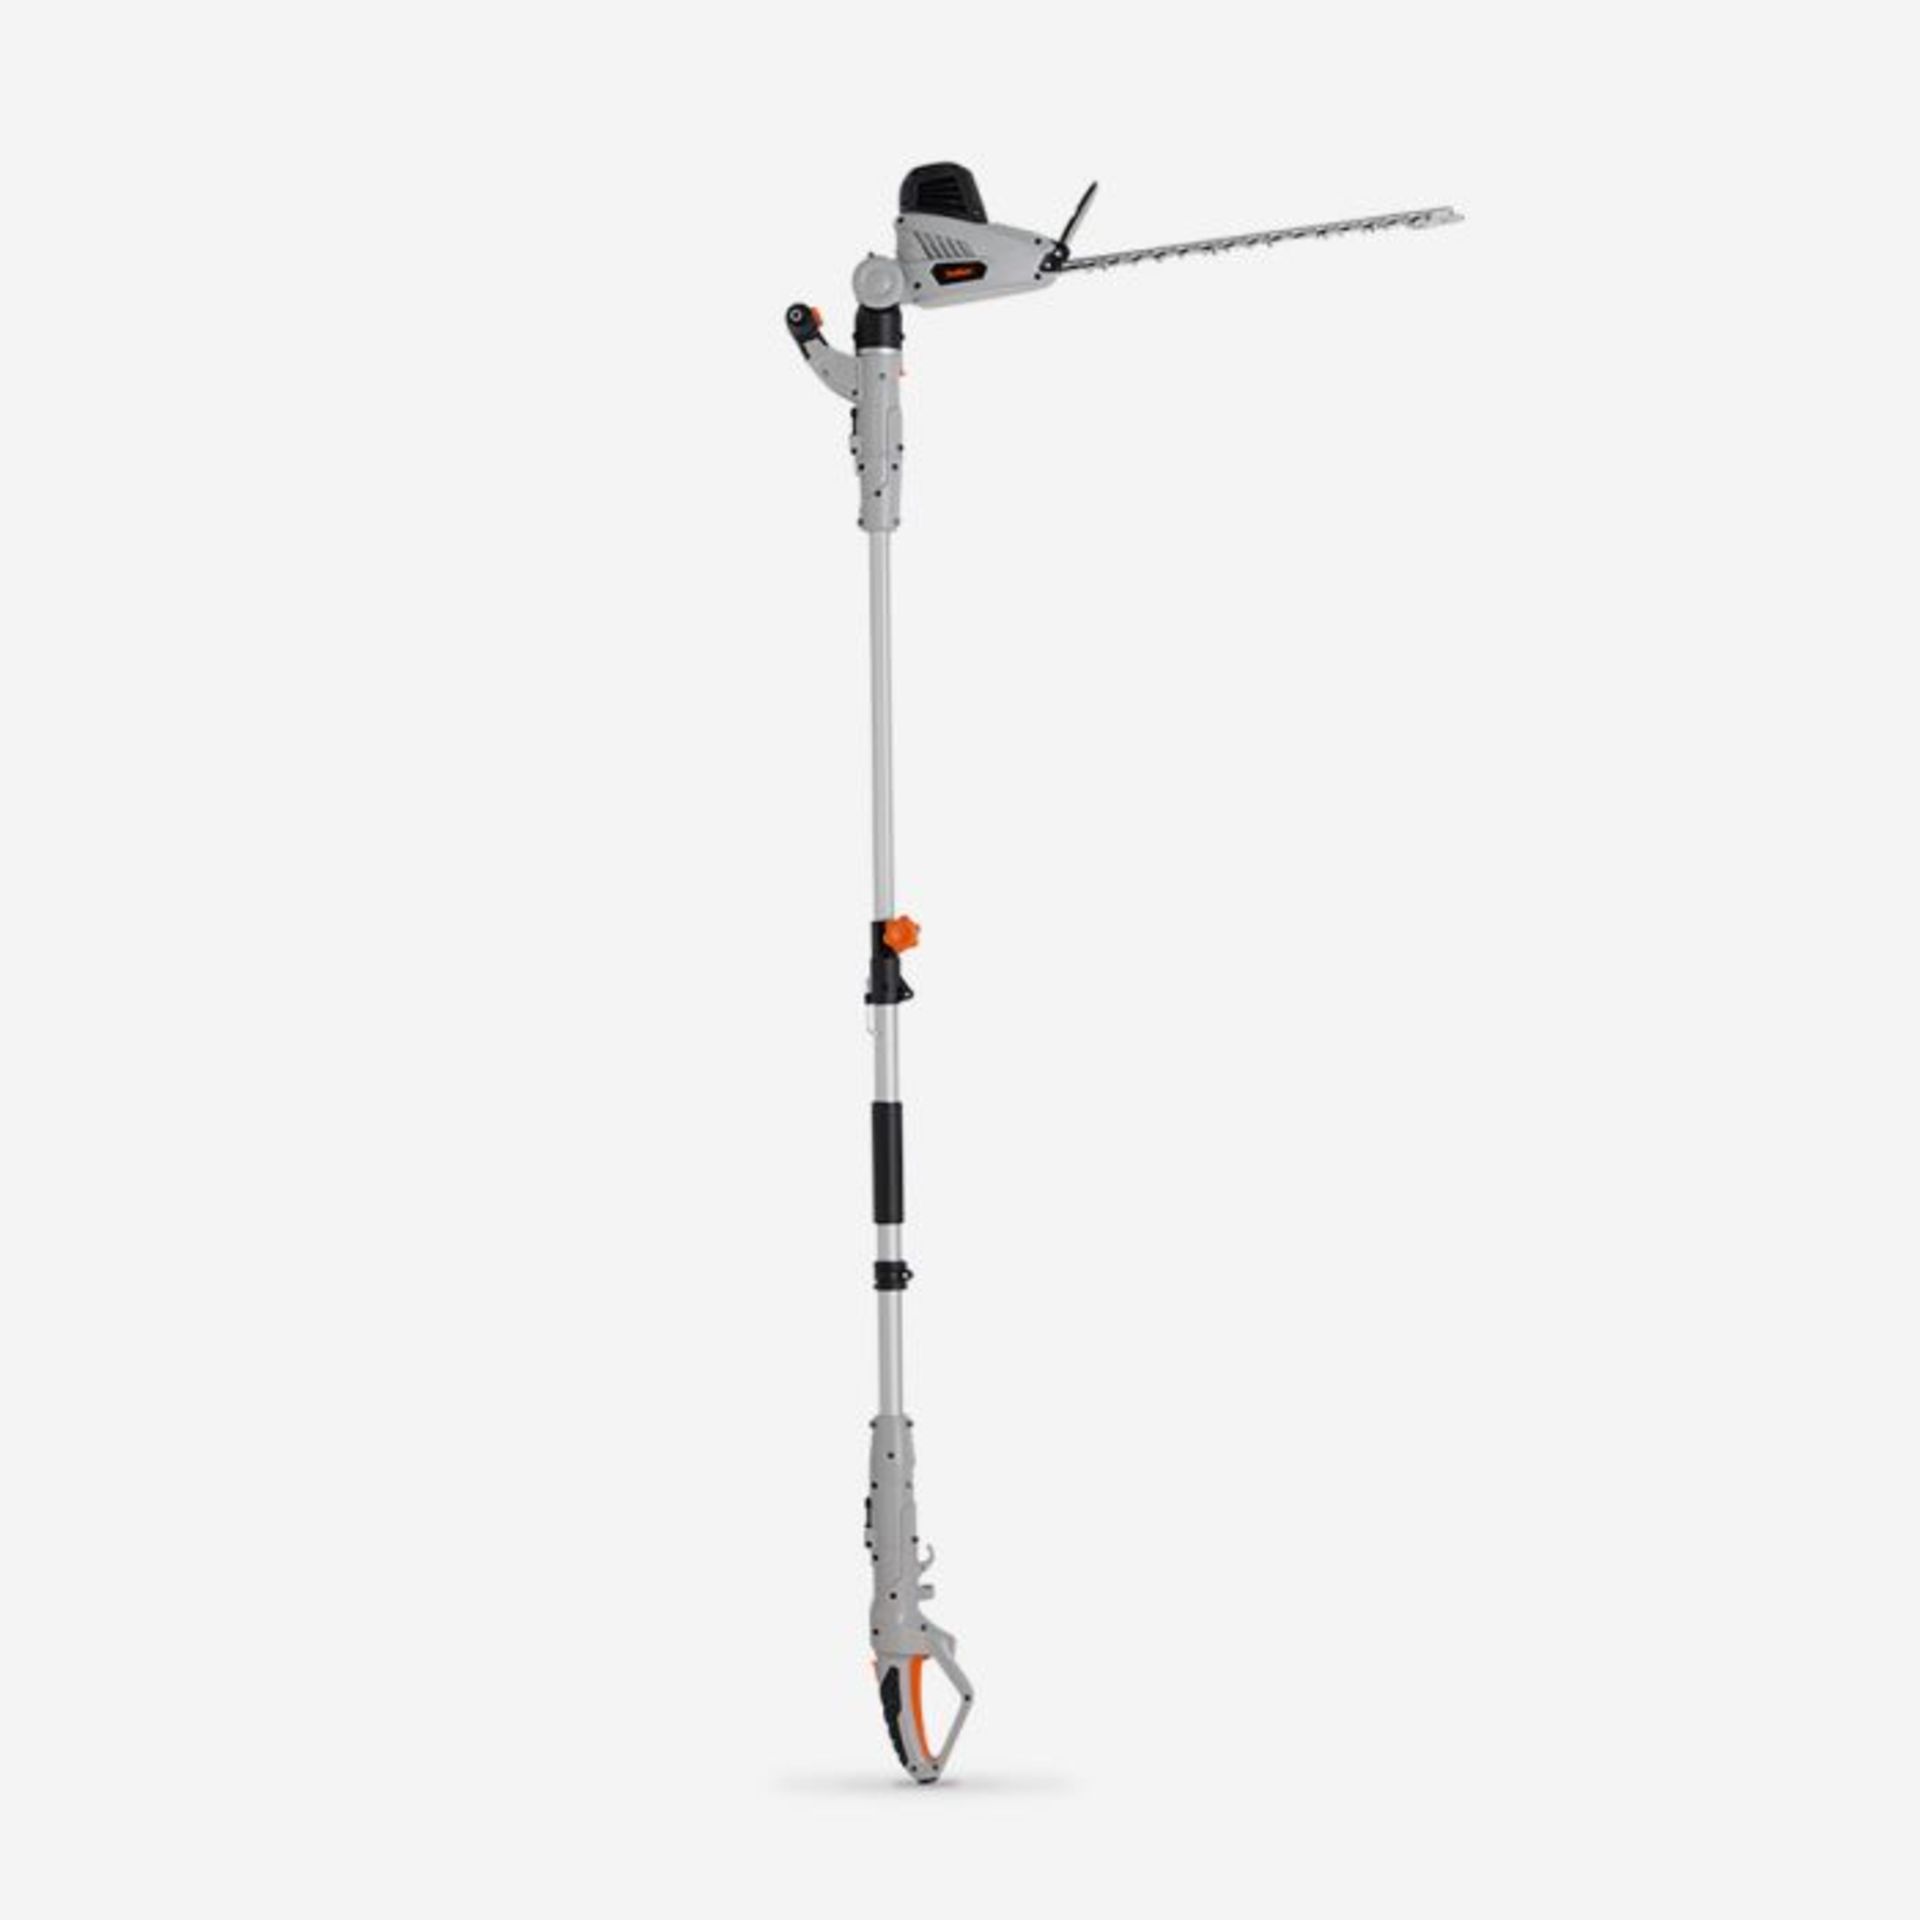 600W Pole Trimmer. Put those overhead heights within easy reach thanks to the impressive